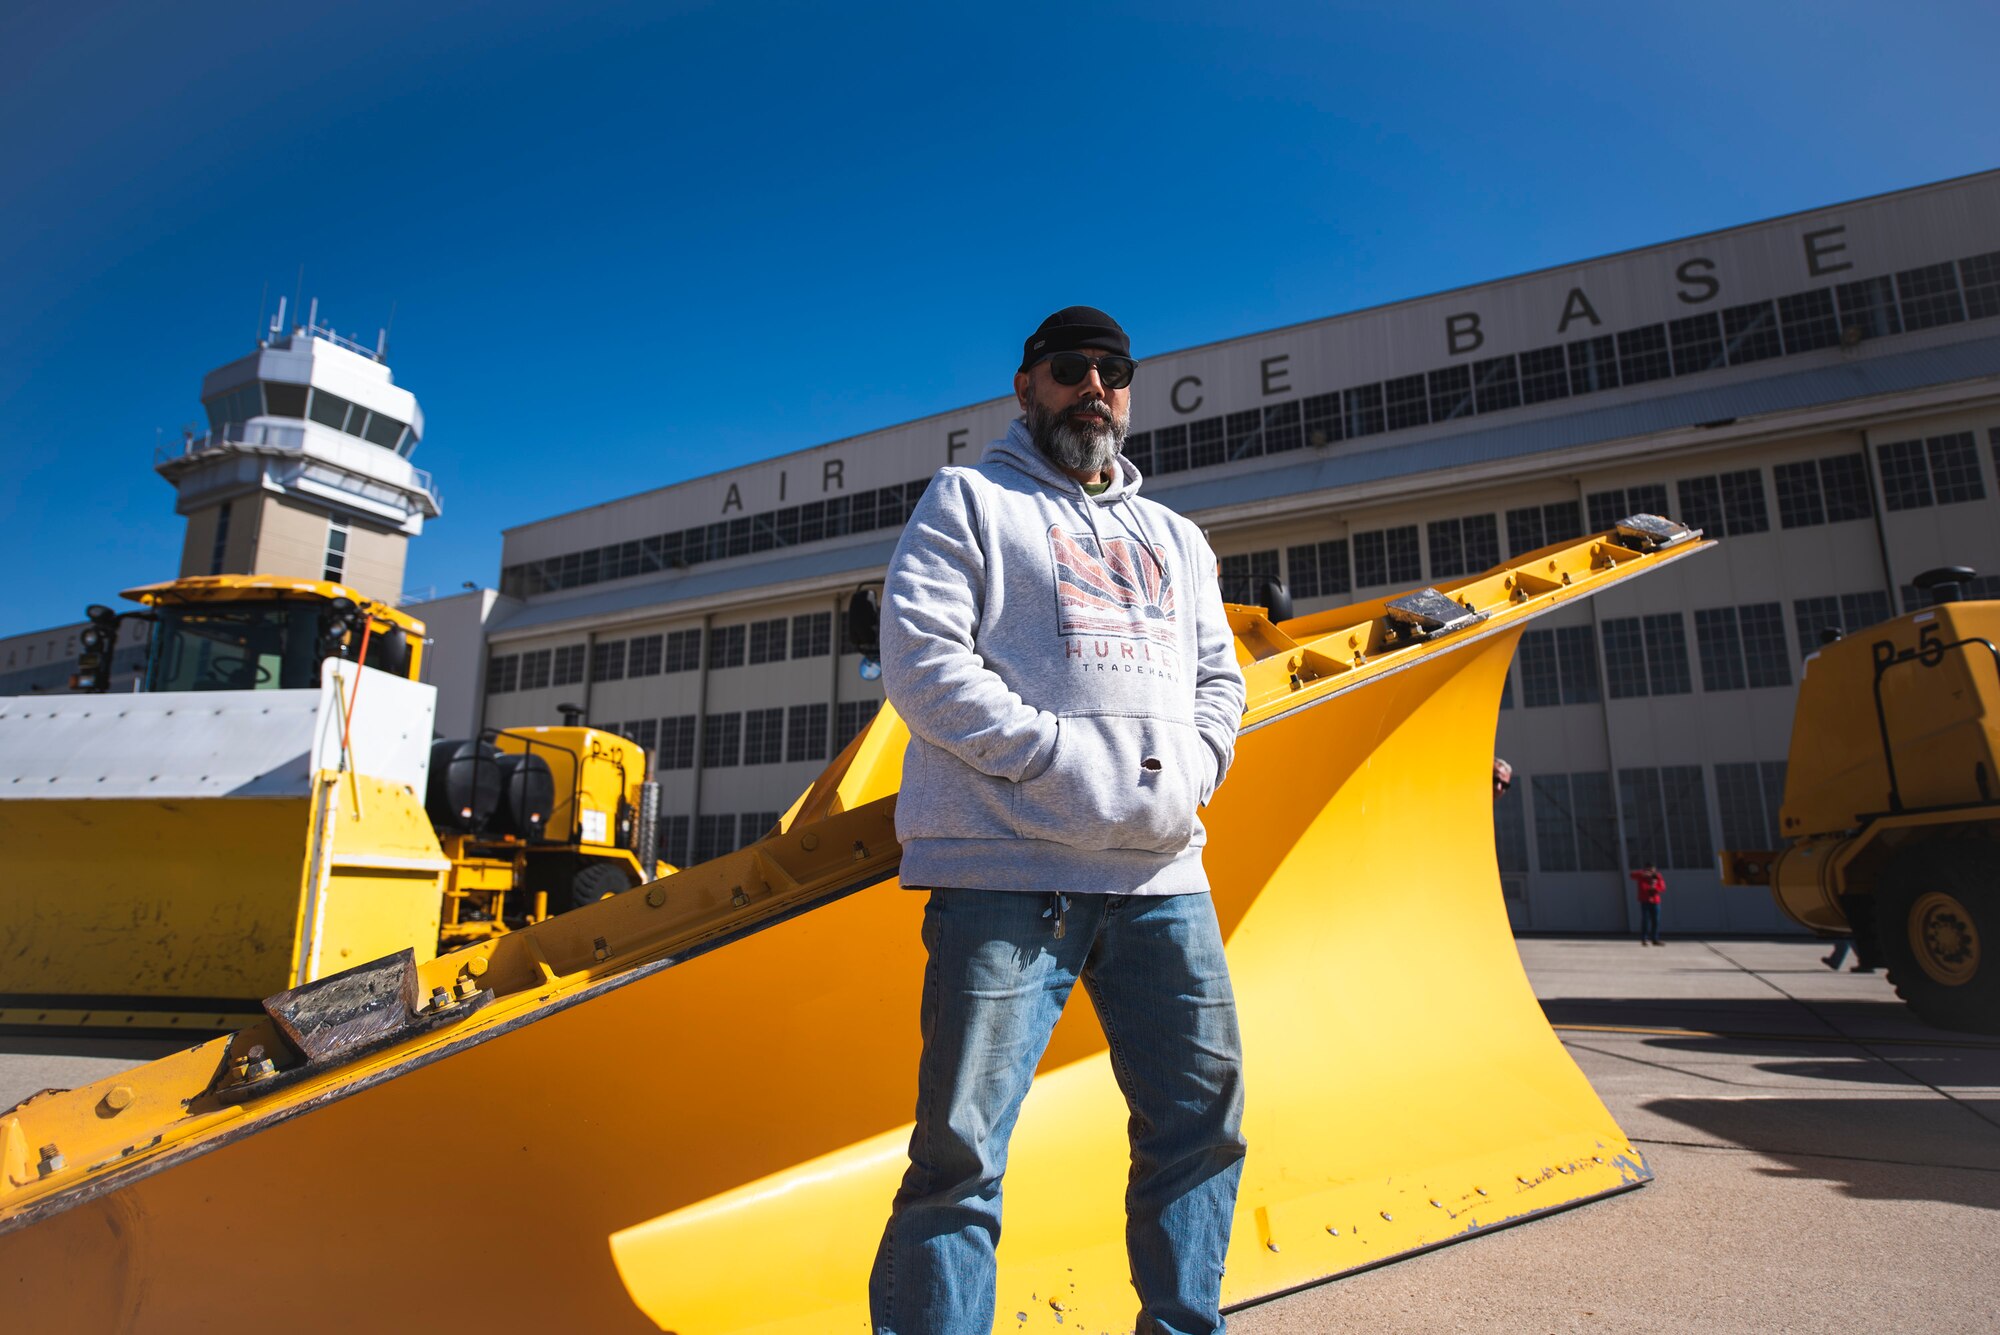 John Beimel, equipment operator for the 88th Civil Engineer Squadron’s Pavements, Equipment and Grounds Section, poses Oct. 14 in front of a snow-removal vehicle at Wright-Patterson Air Force Base, Ohio. The team is responsible for treating, maintaining, and clearing snow and ice from 120 miles of roads, 12.5 million square feet of parking lots, and 283,000 square feet of sidewalks, stairs and flightline. (U.S. Air Force photo by Hannah Carranza)